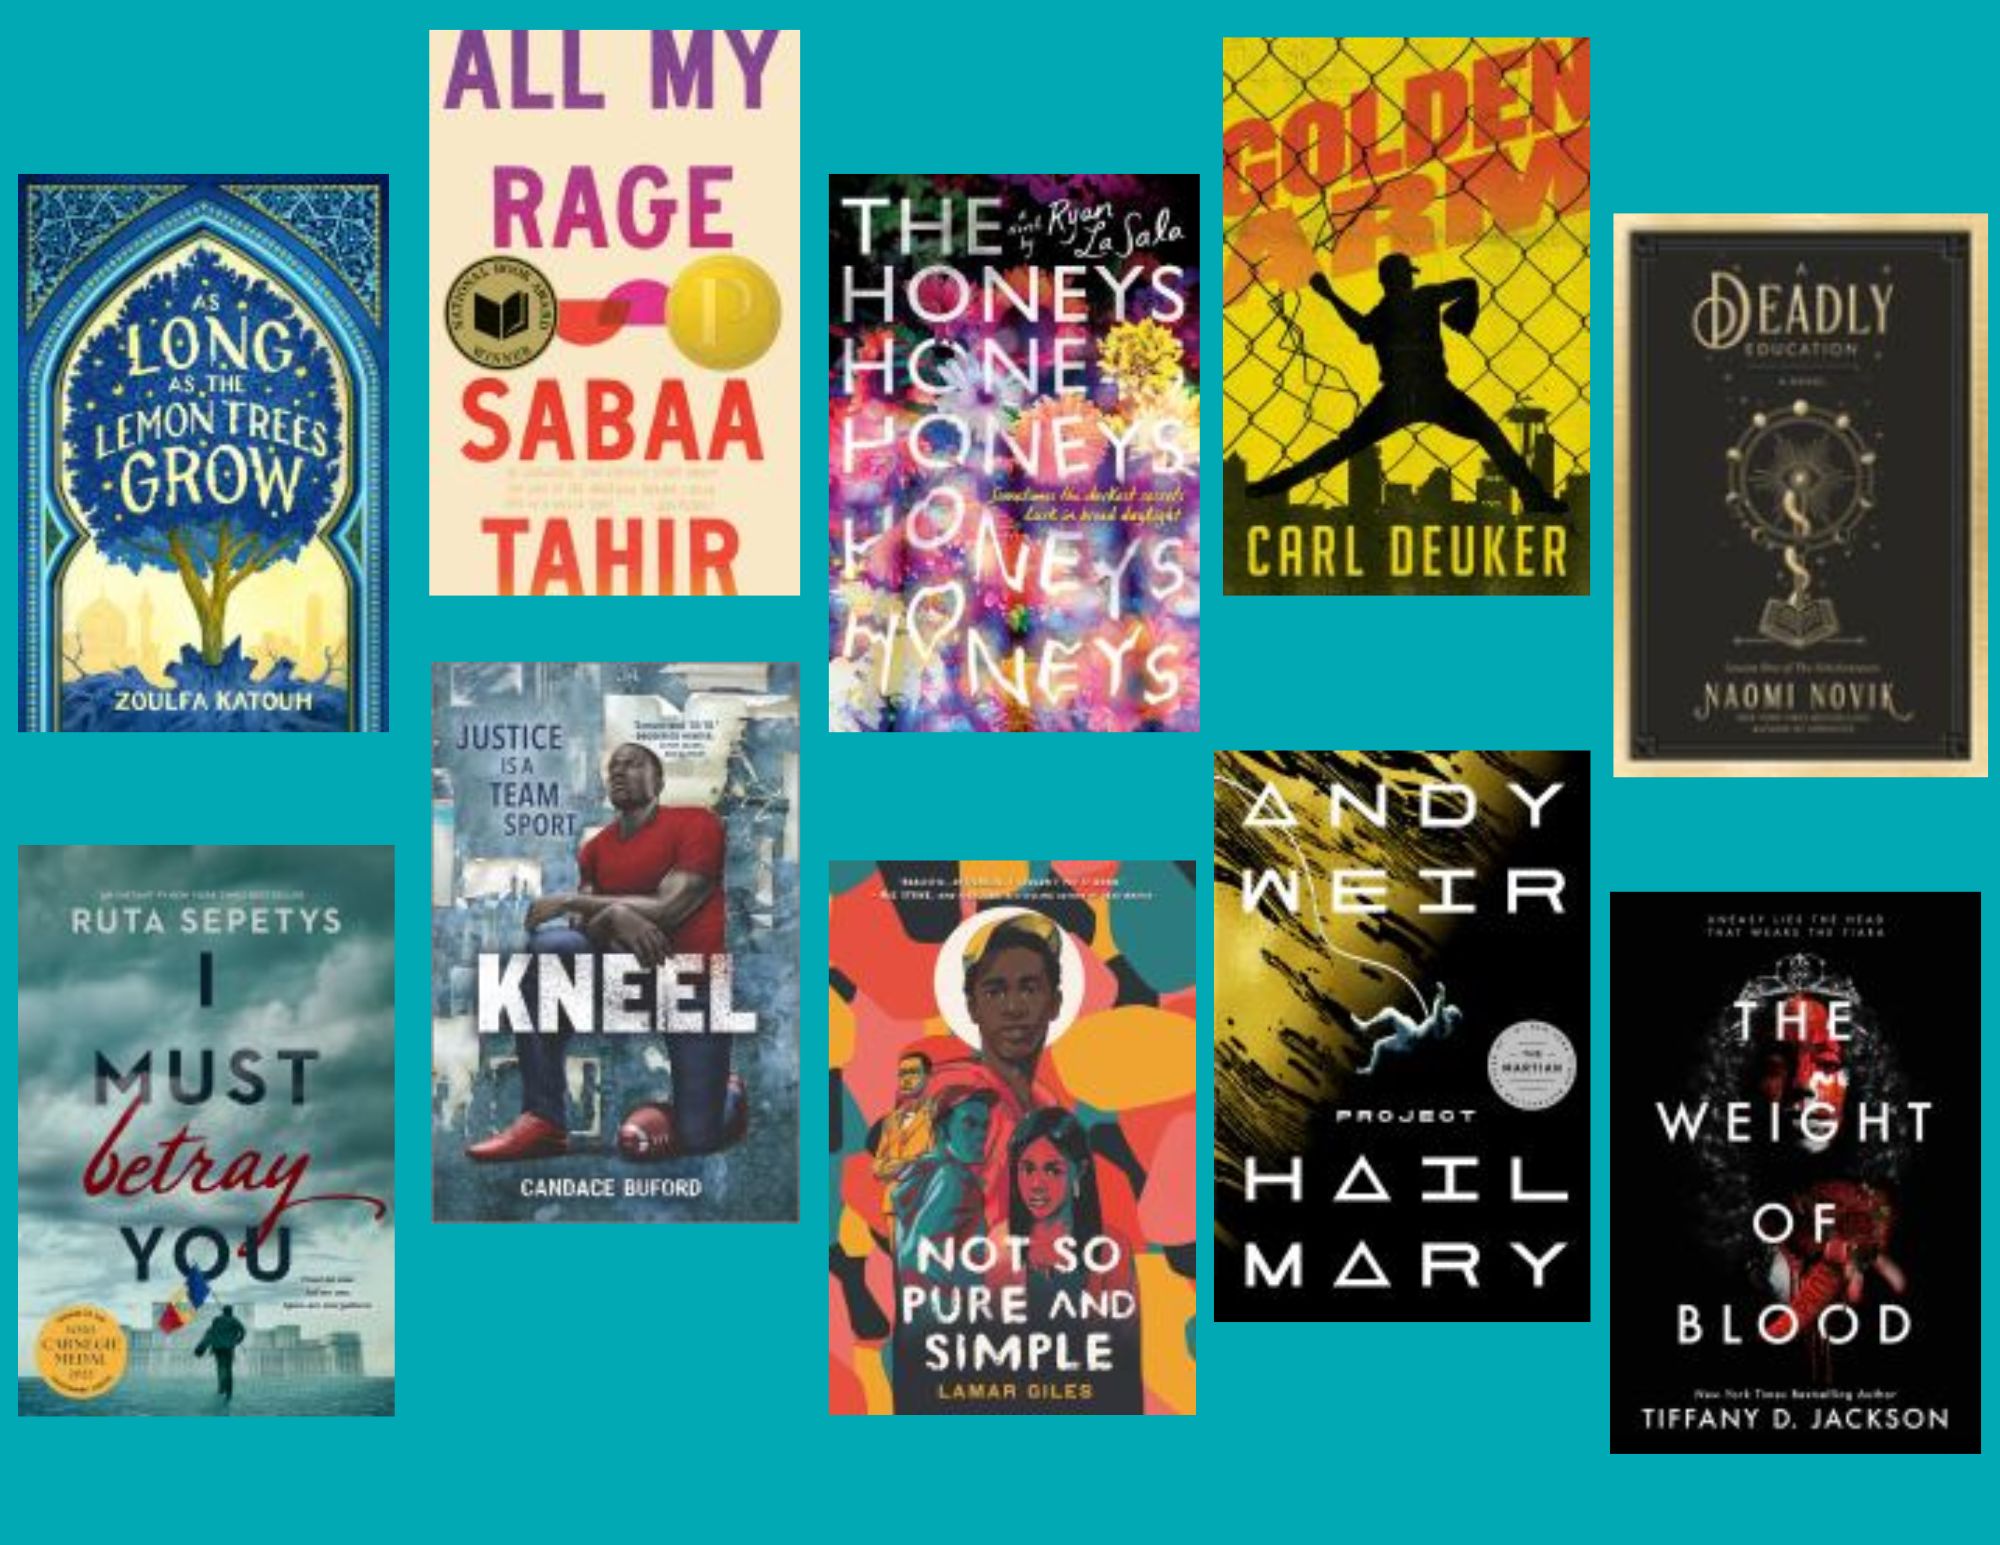 Photo collage of the ten Connecticut Nutmeg High School Nominees. Book covers include book titles, and author. The collage has a turquoise back ground. 